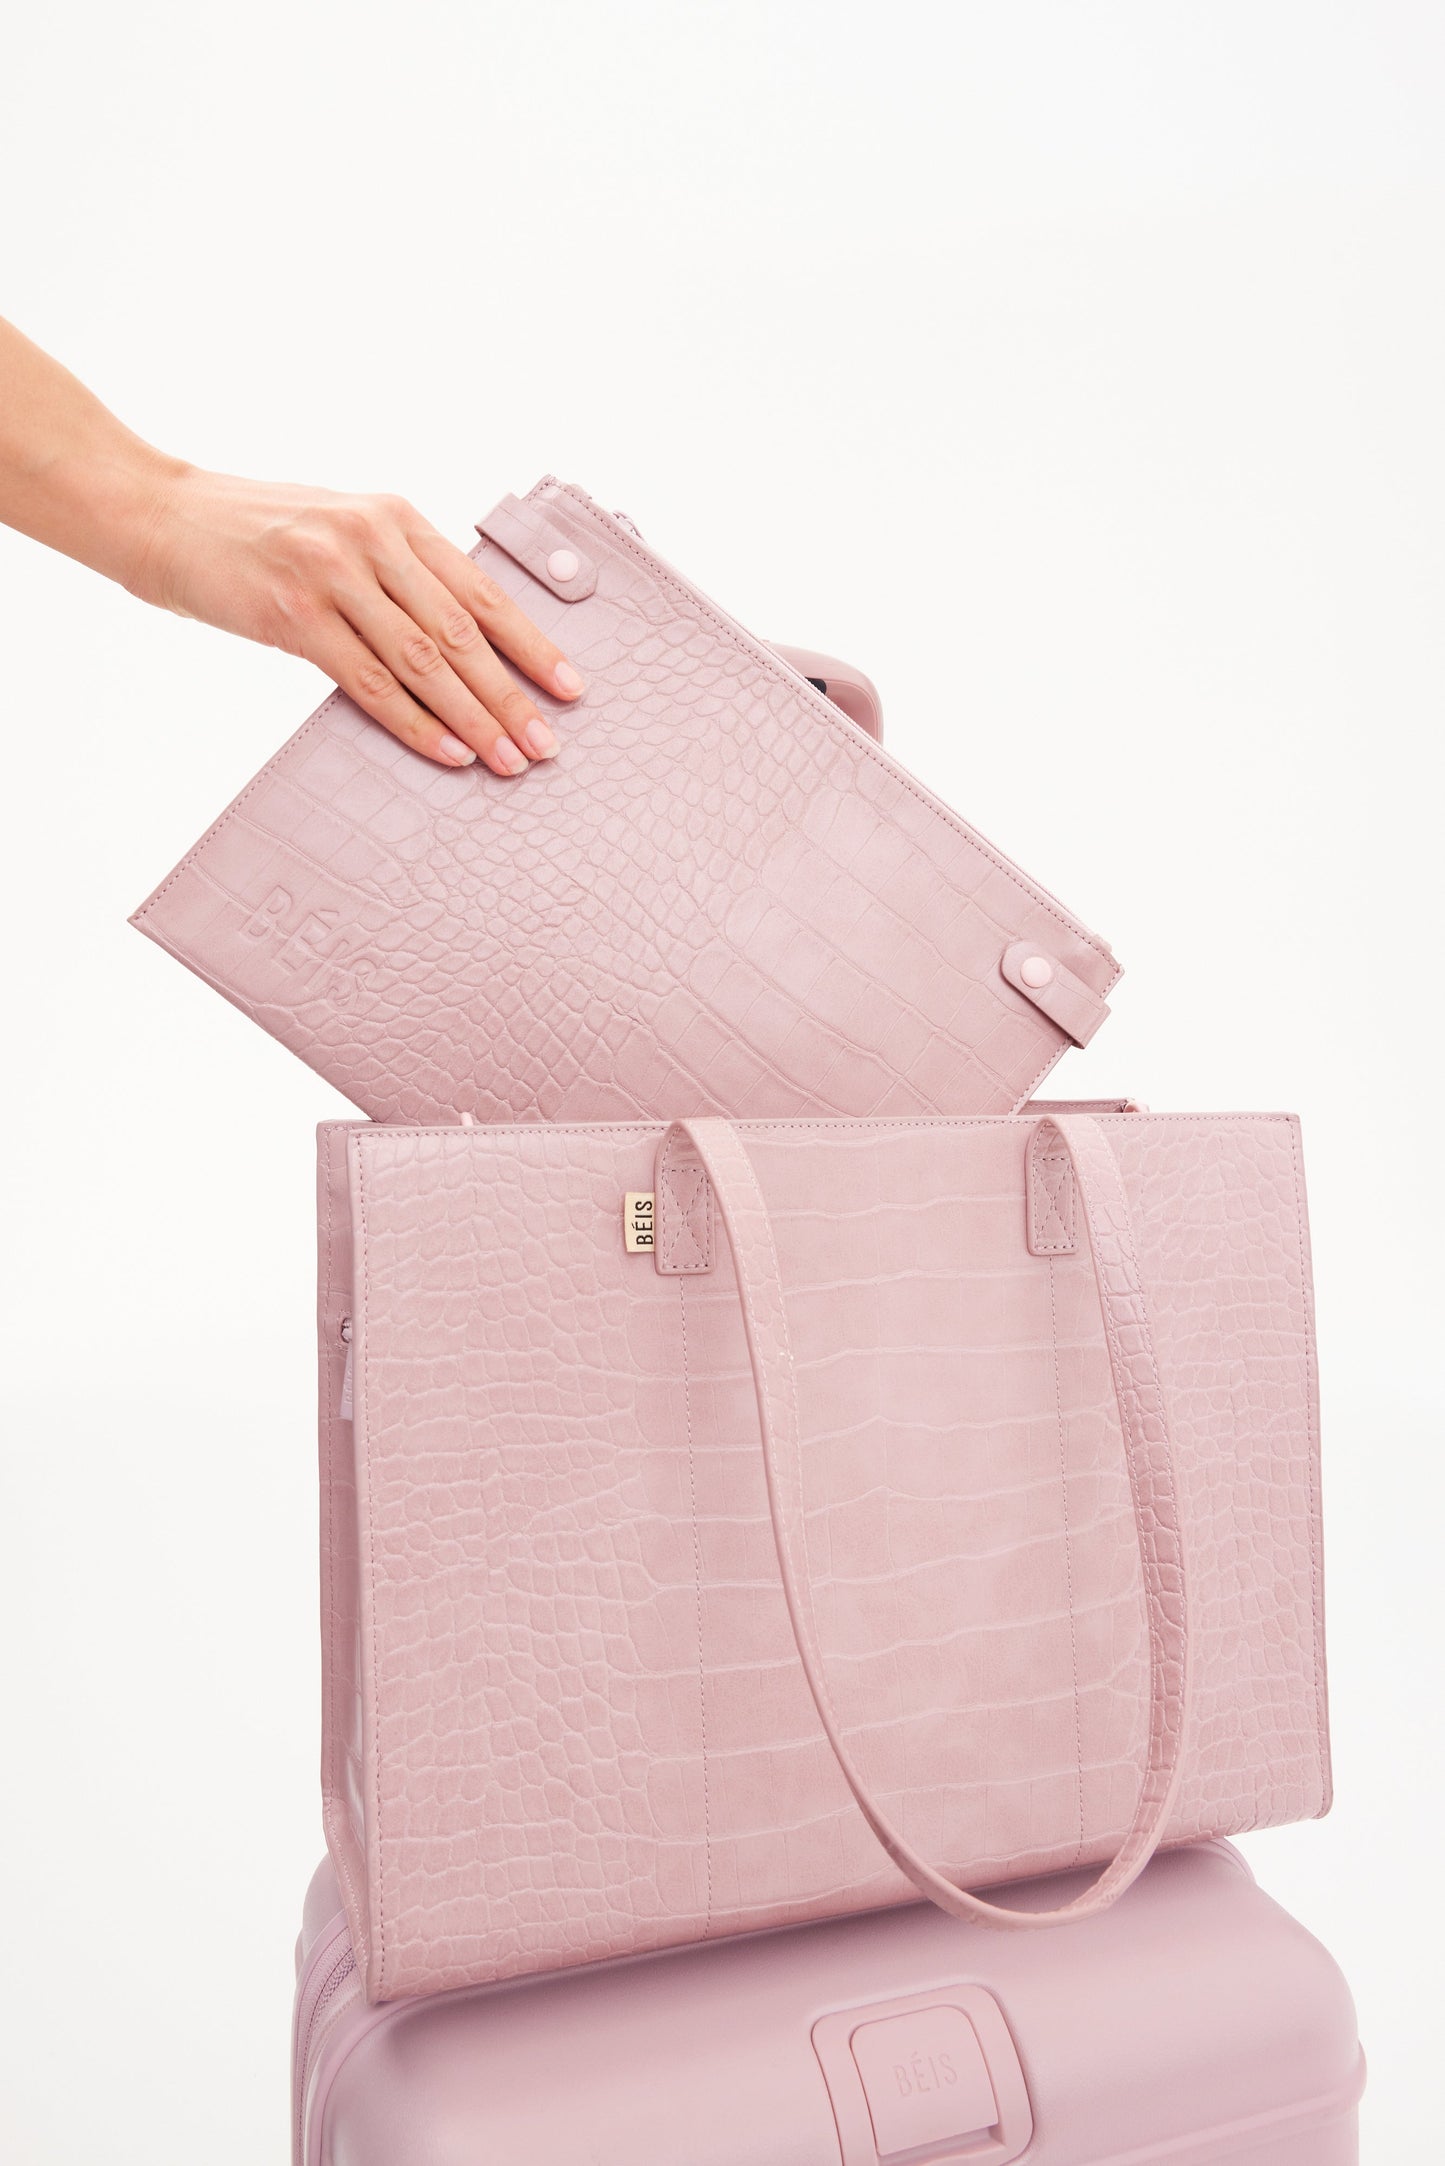 The Large Work Tote in Atlas Pink